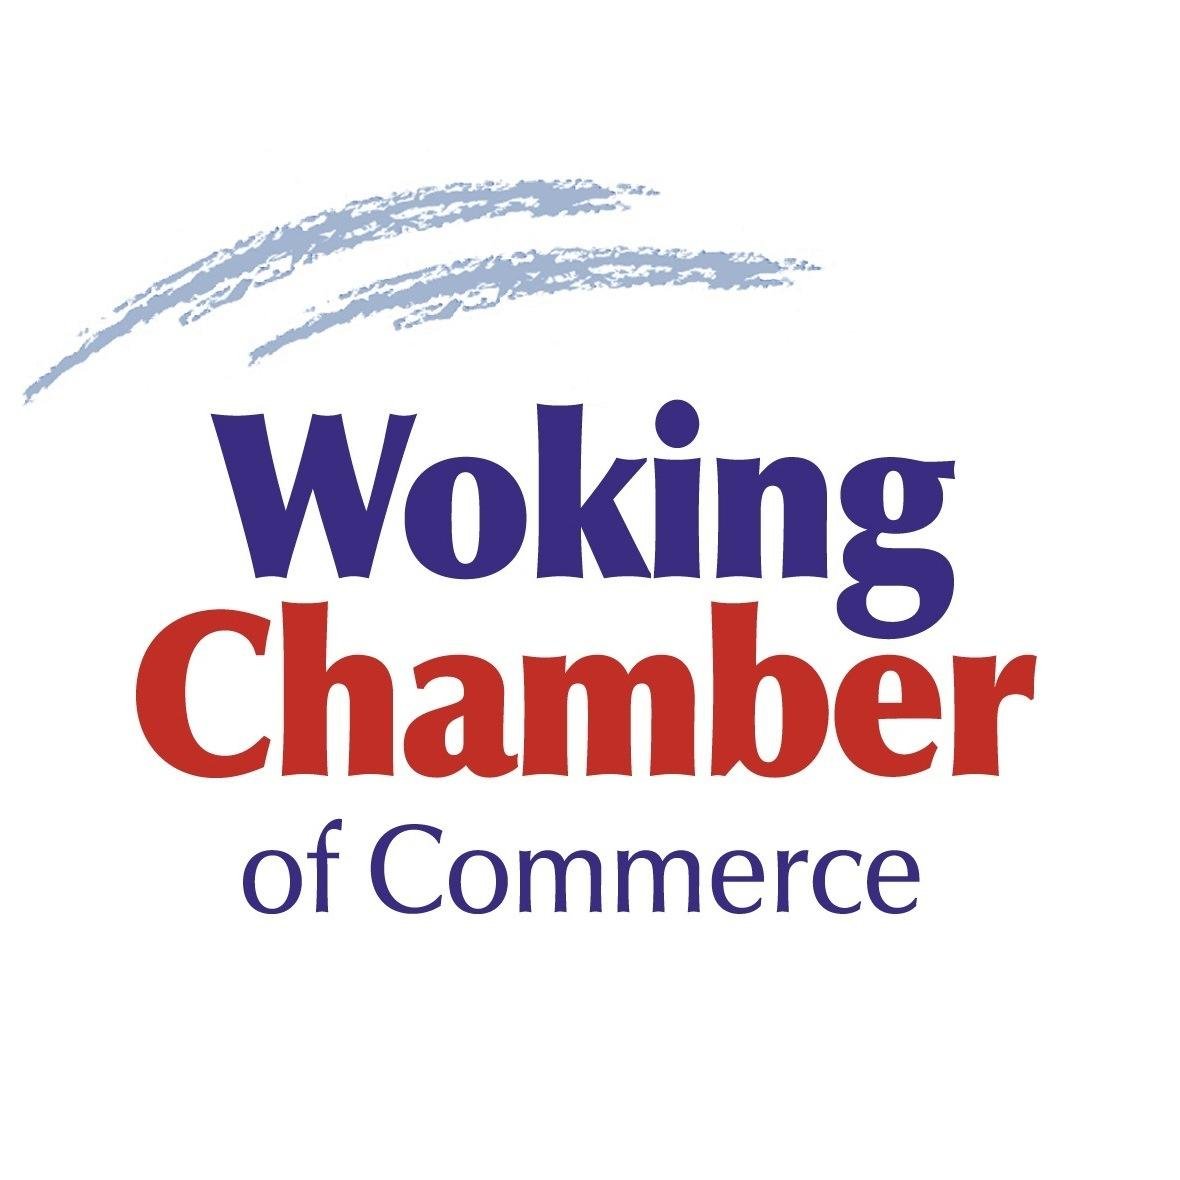 Woking Chamber of Commerce connects, promotes and supports businesses with events, activities and relationships with @WokingCouncil and local media.